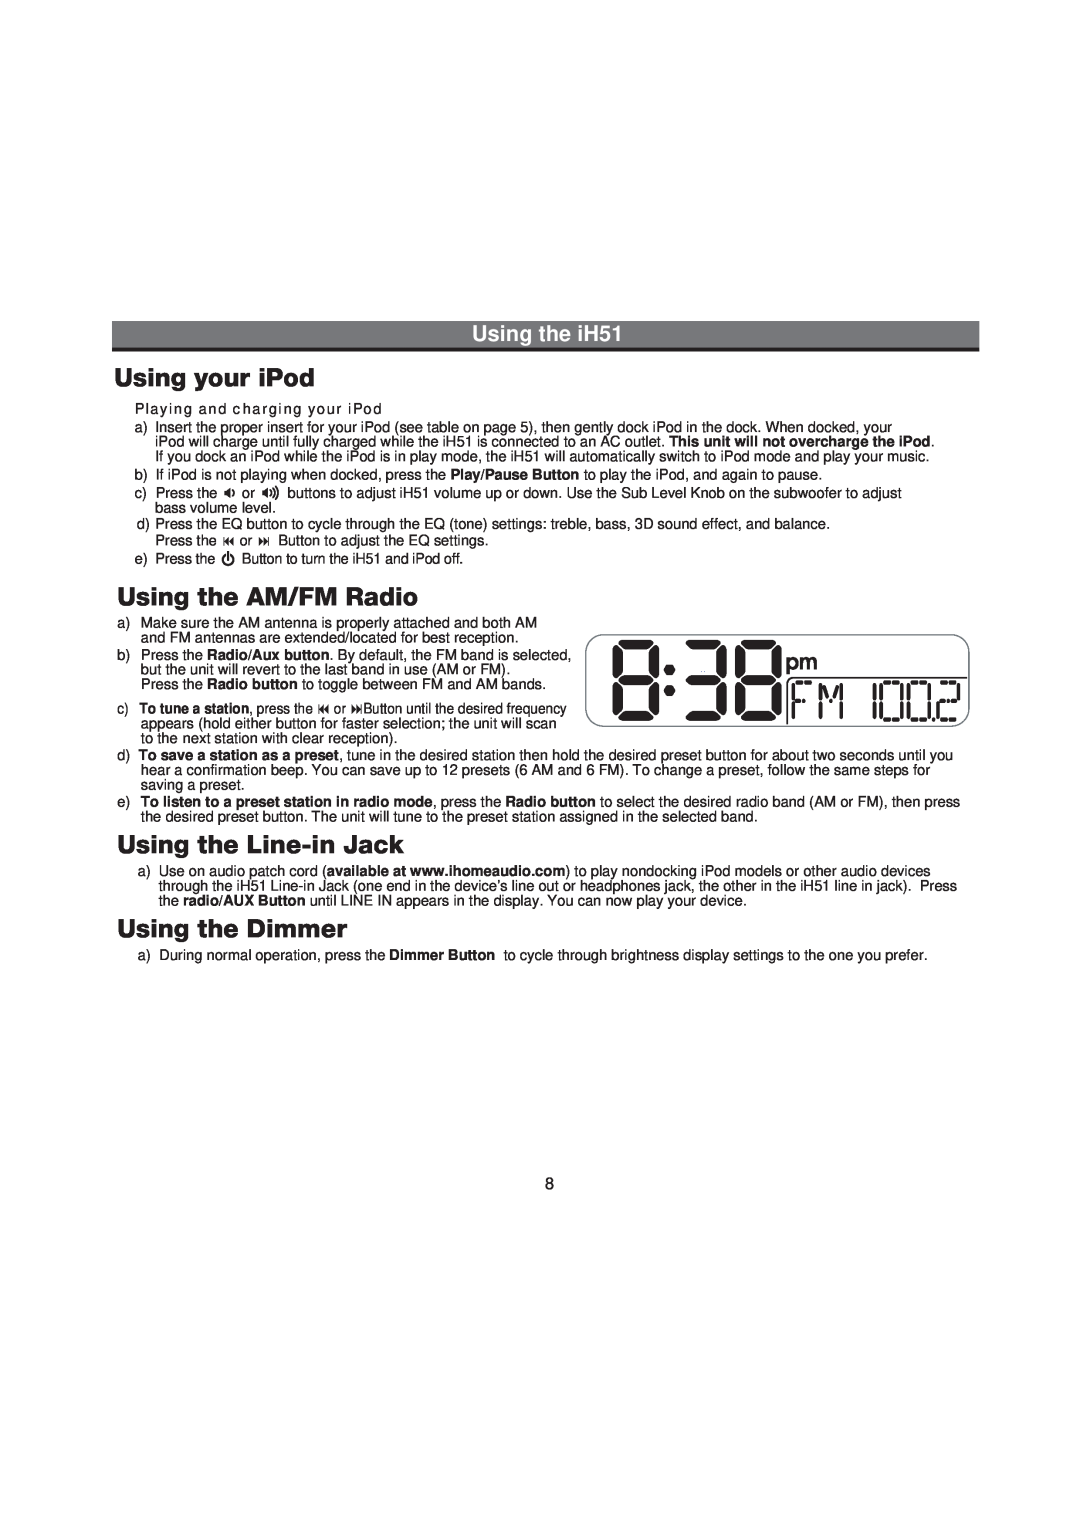 iHome manual Using your iPod, Using the AM/FM Radio, Using the Line-in Jack, Using the Dimmer, Using the iH51 